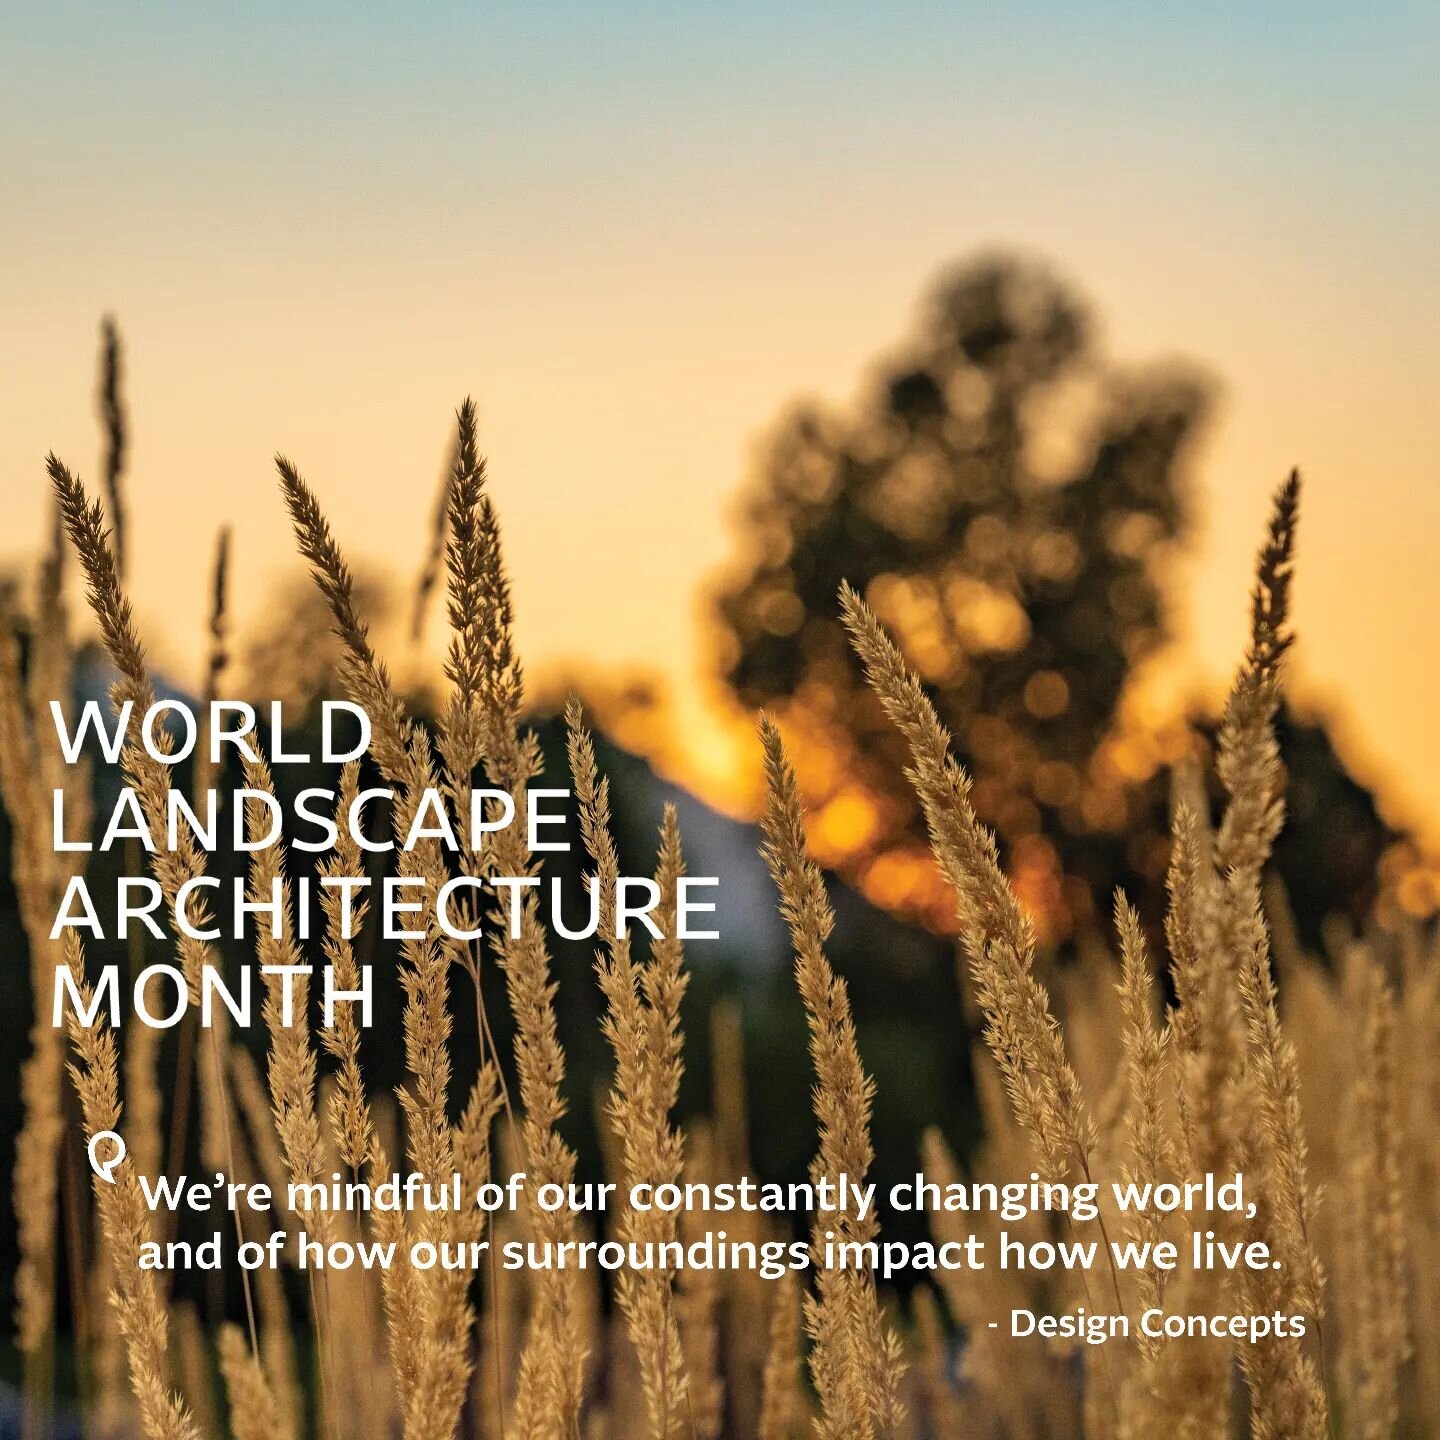 Happy World Landscape Architecture Month! As Landscape Architects we're always mindful of our constantly changing world, and of how our surroundings impact how we live. We're thankful to engage with our environment to create landscapes in which peopl